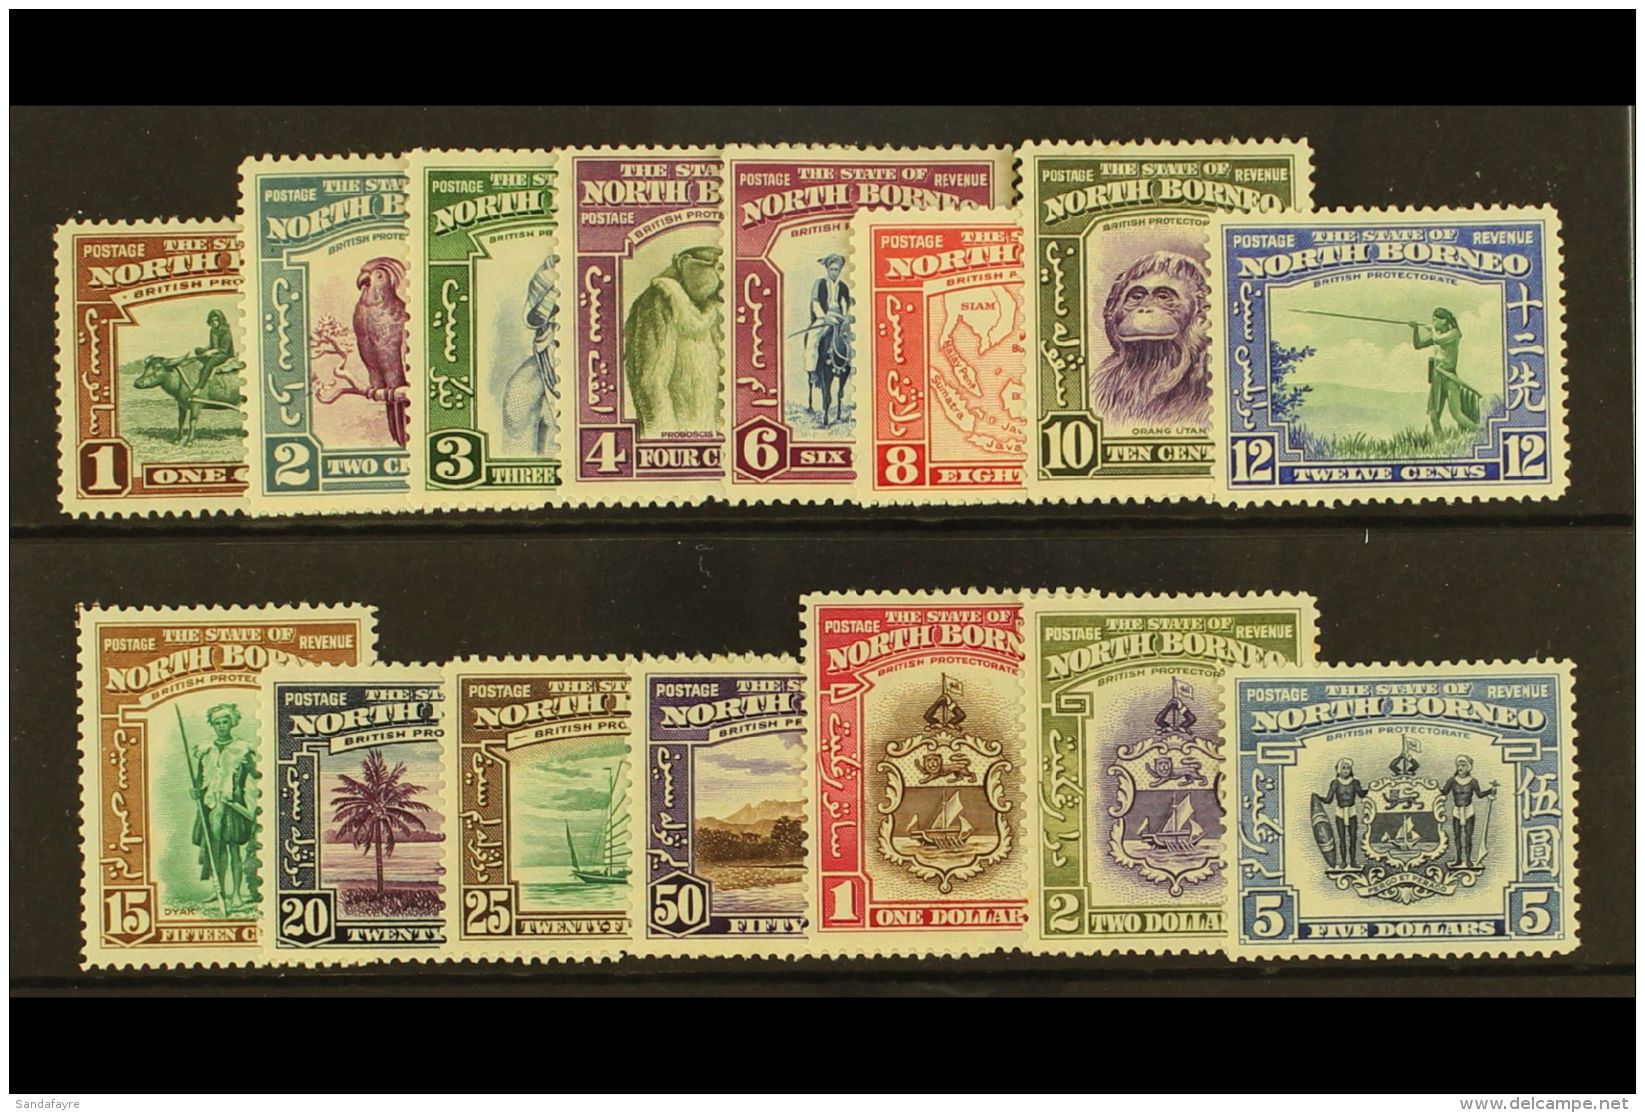 1939 Pictorial Set Complete, SG 303/17, Very Fine And Fresh Mint. Scarce Set. (`5 Stamps) For More Images, Please... - Borneo Del Nord (...-1963)